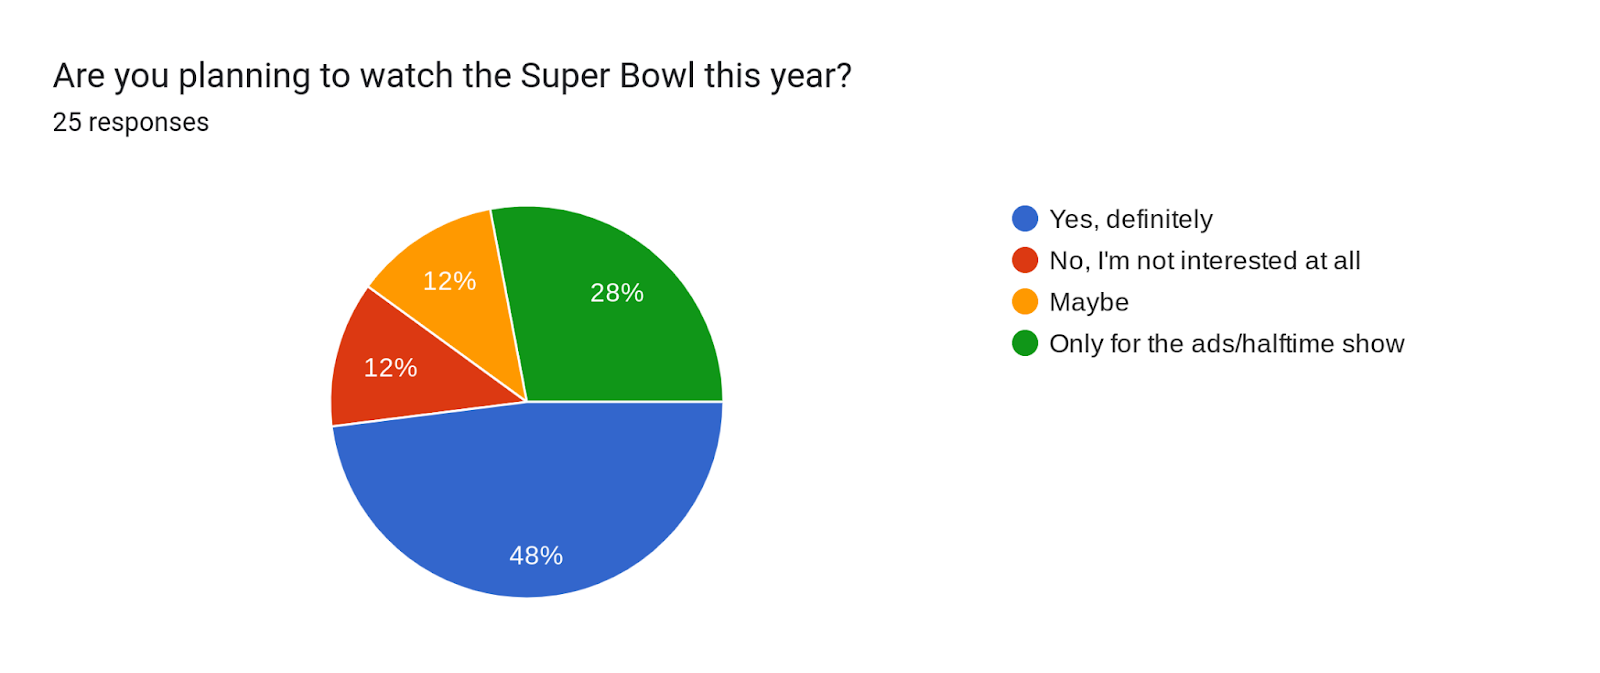 Forms response chart. Question title: Are you planning to watch the Super Bowl this year?. Number of responses: 25 responses.